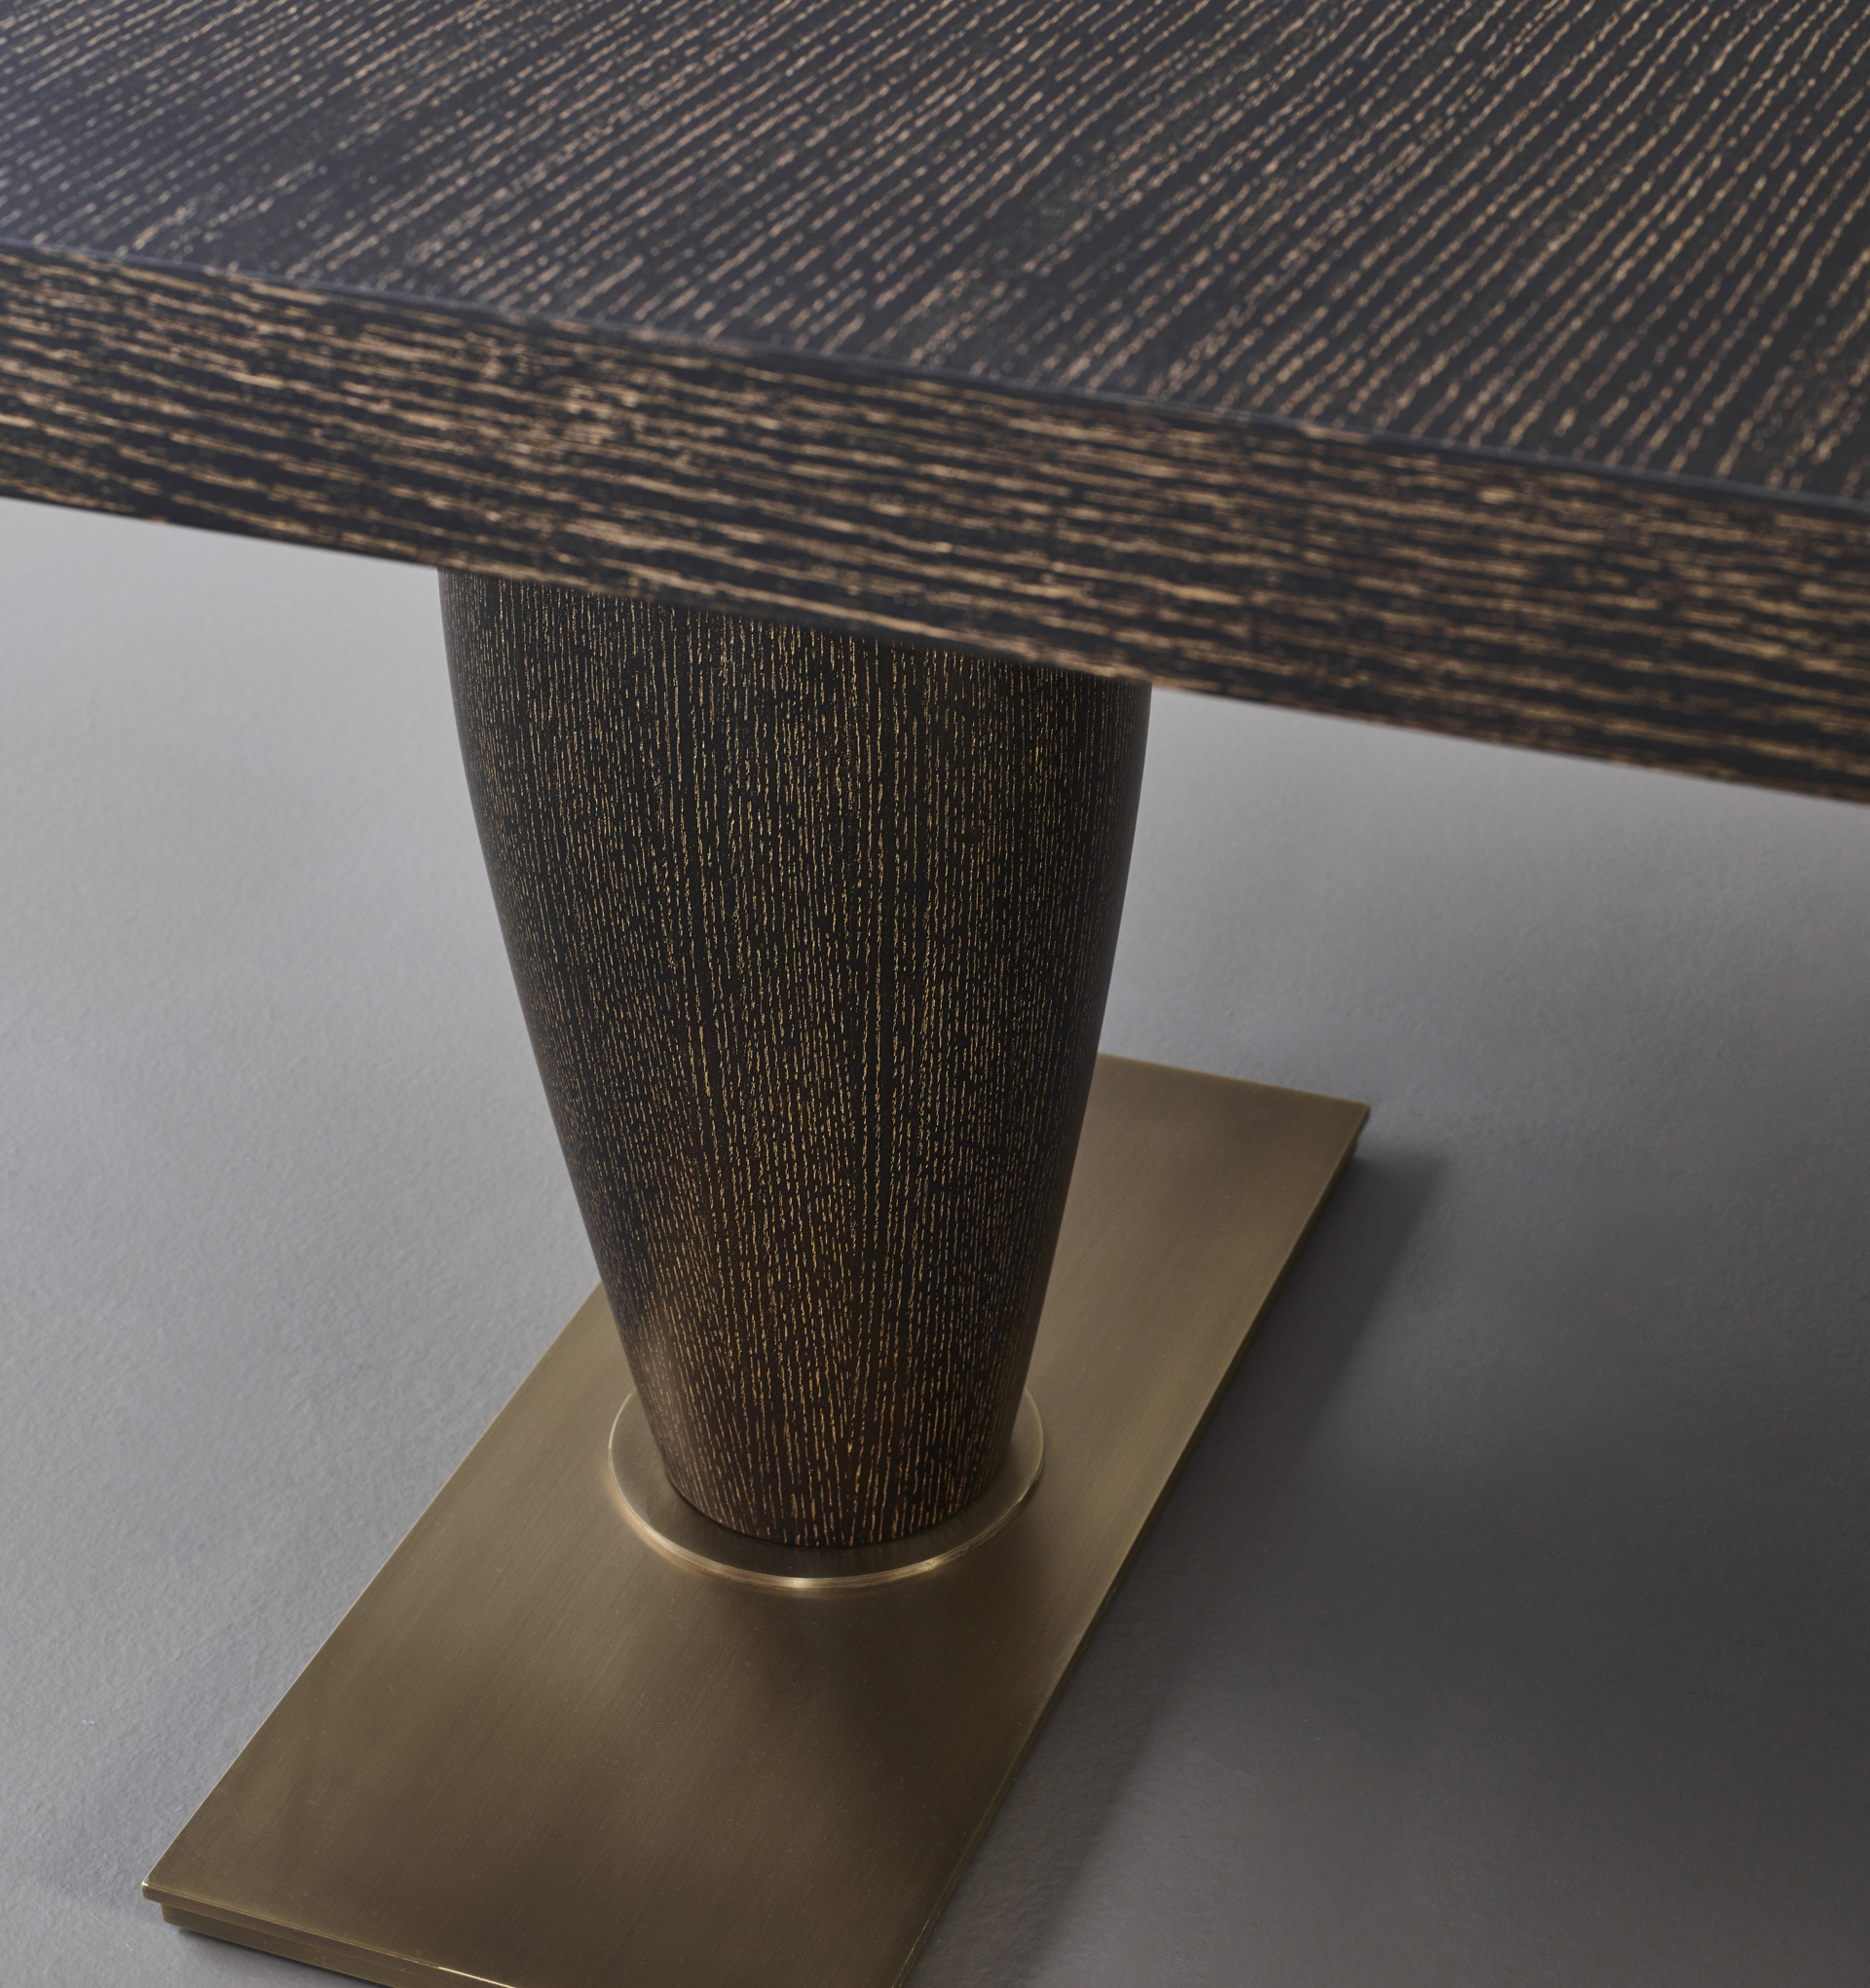 Bassano is an impressive wooden dining table with a bronze base available with inlaid top, from Promemoria's catalogue | Promemoria